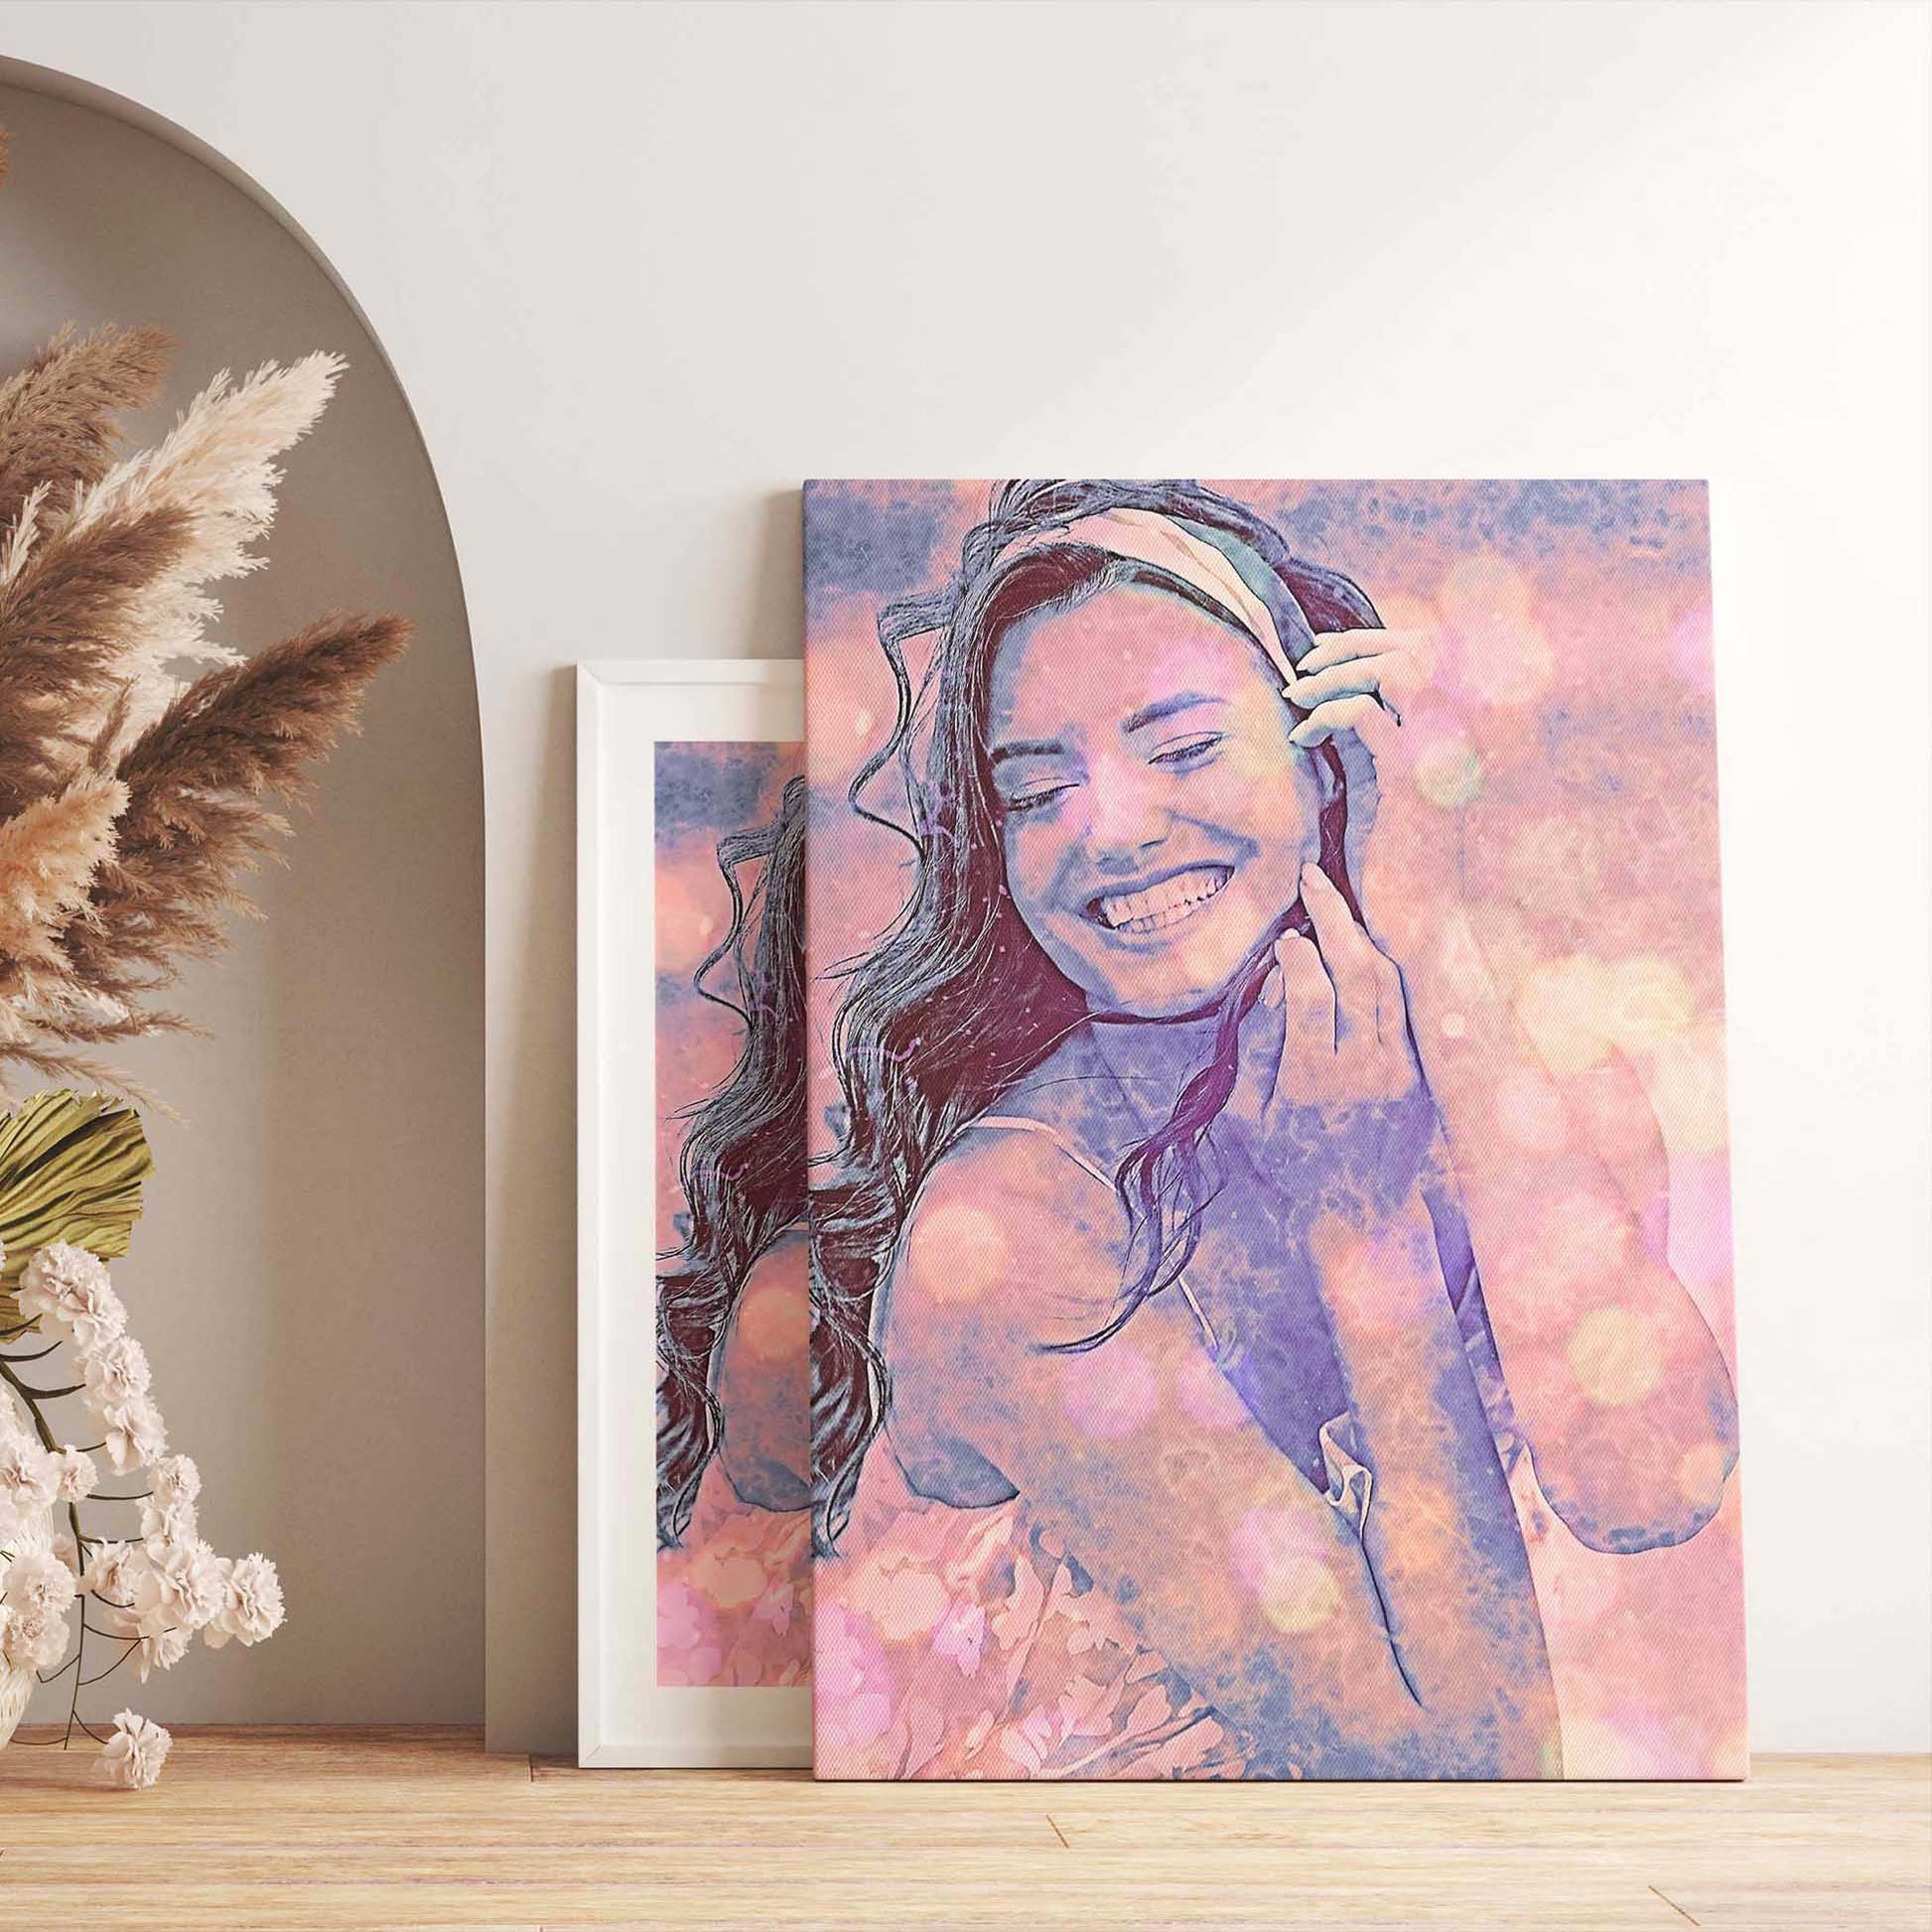 Make a bold statement with our Personalized Special Purple FX Canvas. This captivating artwork blends digital art techniques with handmade craftsmanship, resulting in a visual feast for the eyes. Let the vibrant colors and dynamic energy